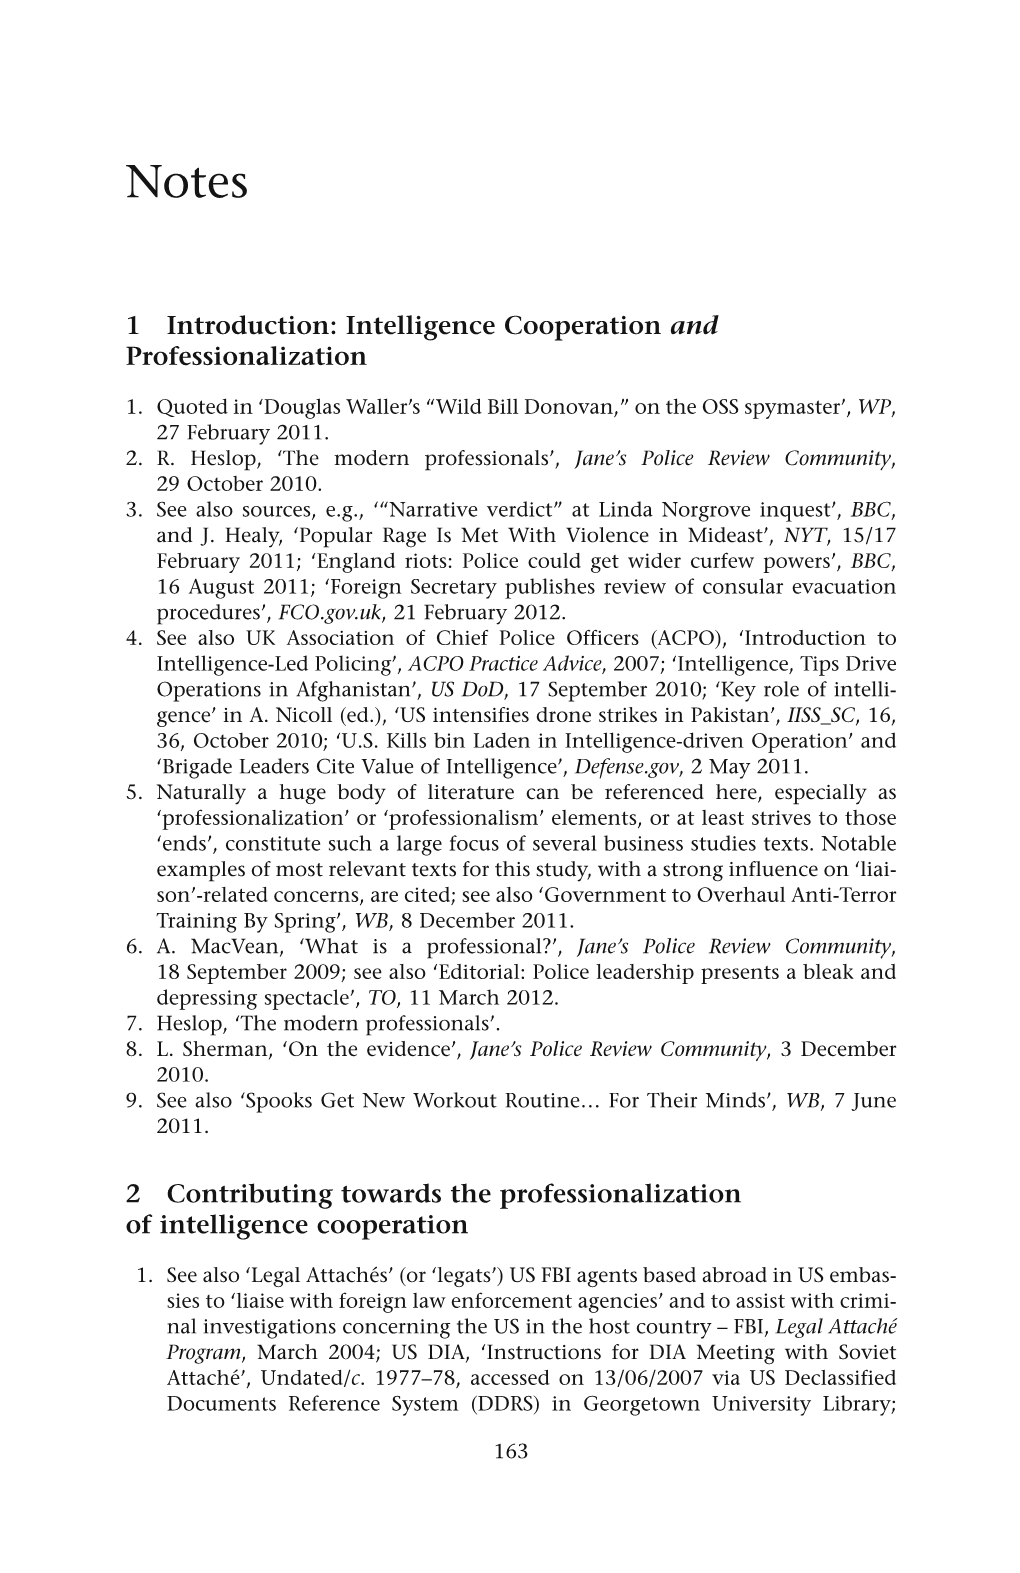 1 Introduction: Intelligence Cooperation and Professionalization